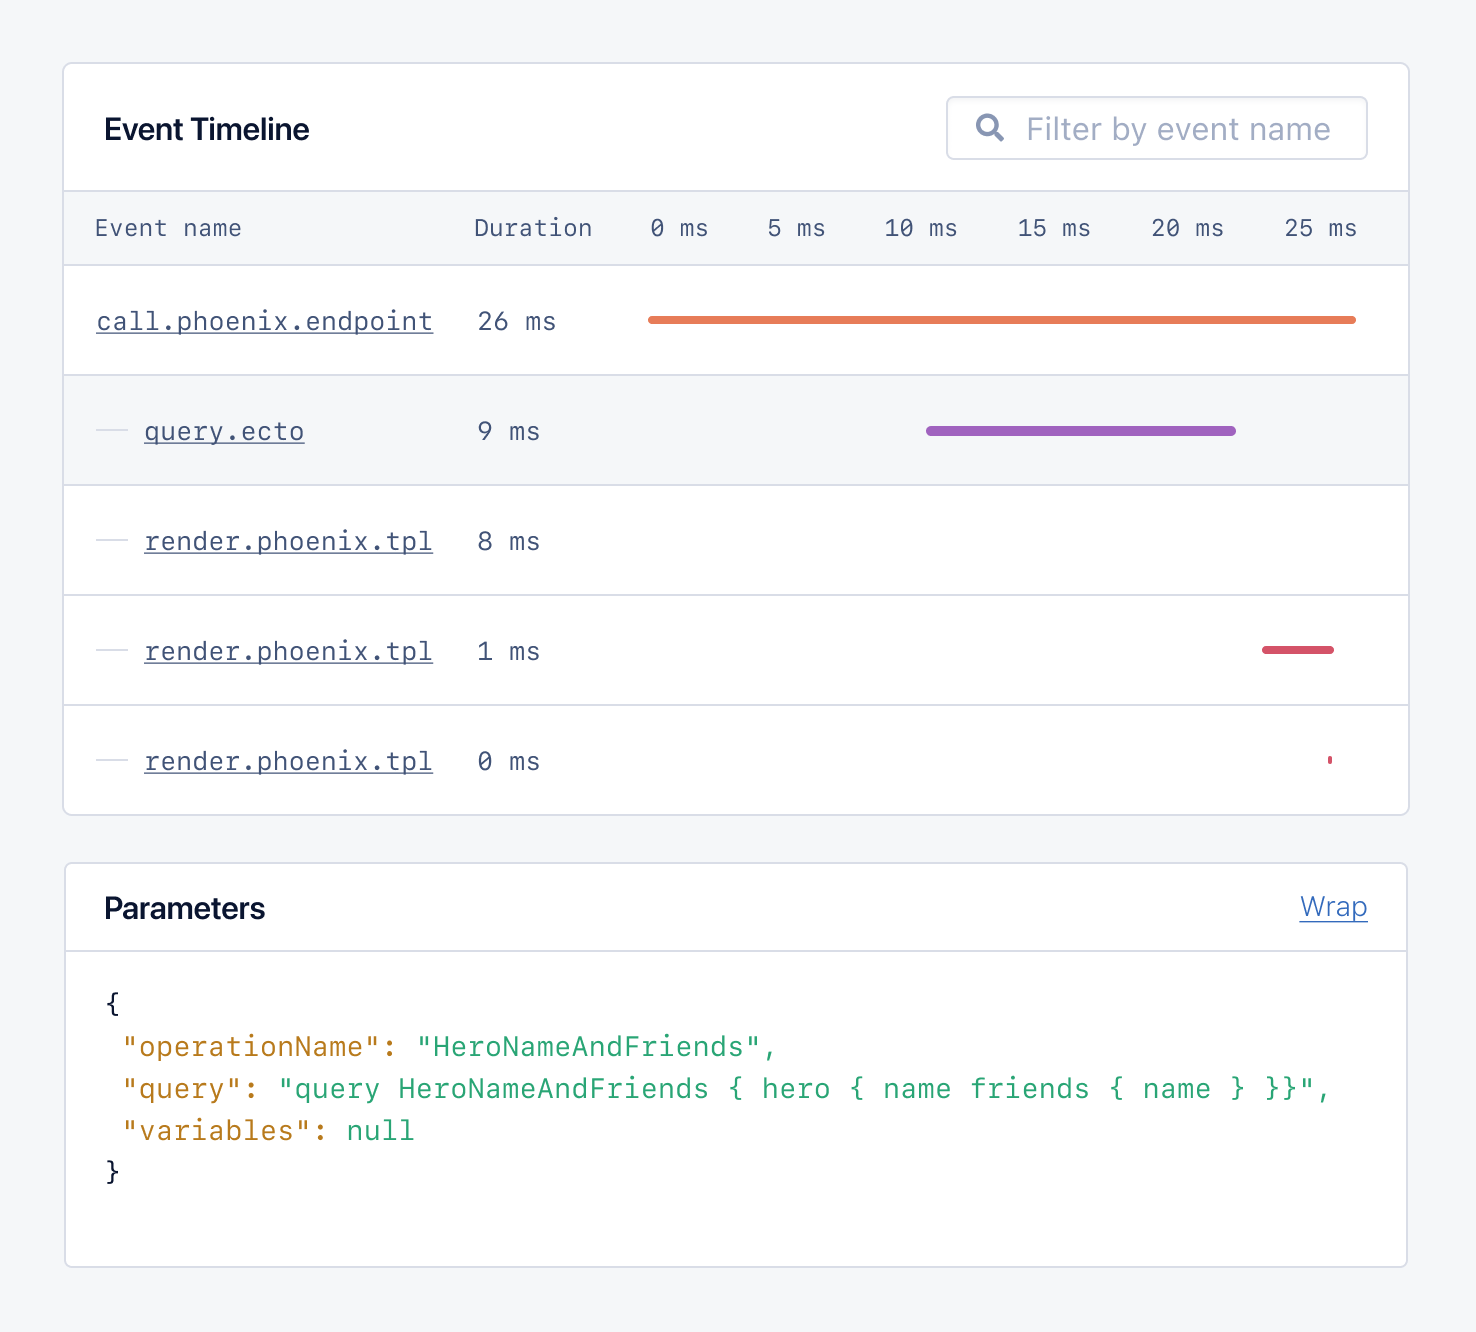 Event timeline showing GraphQL events